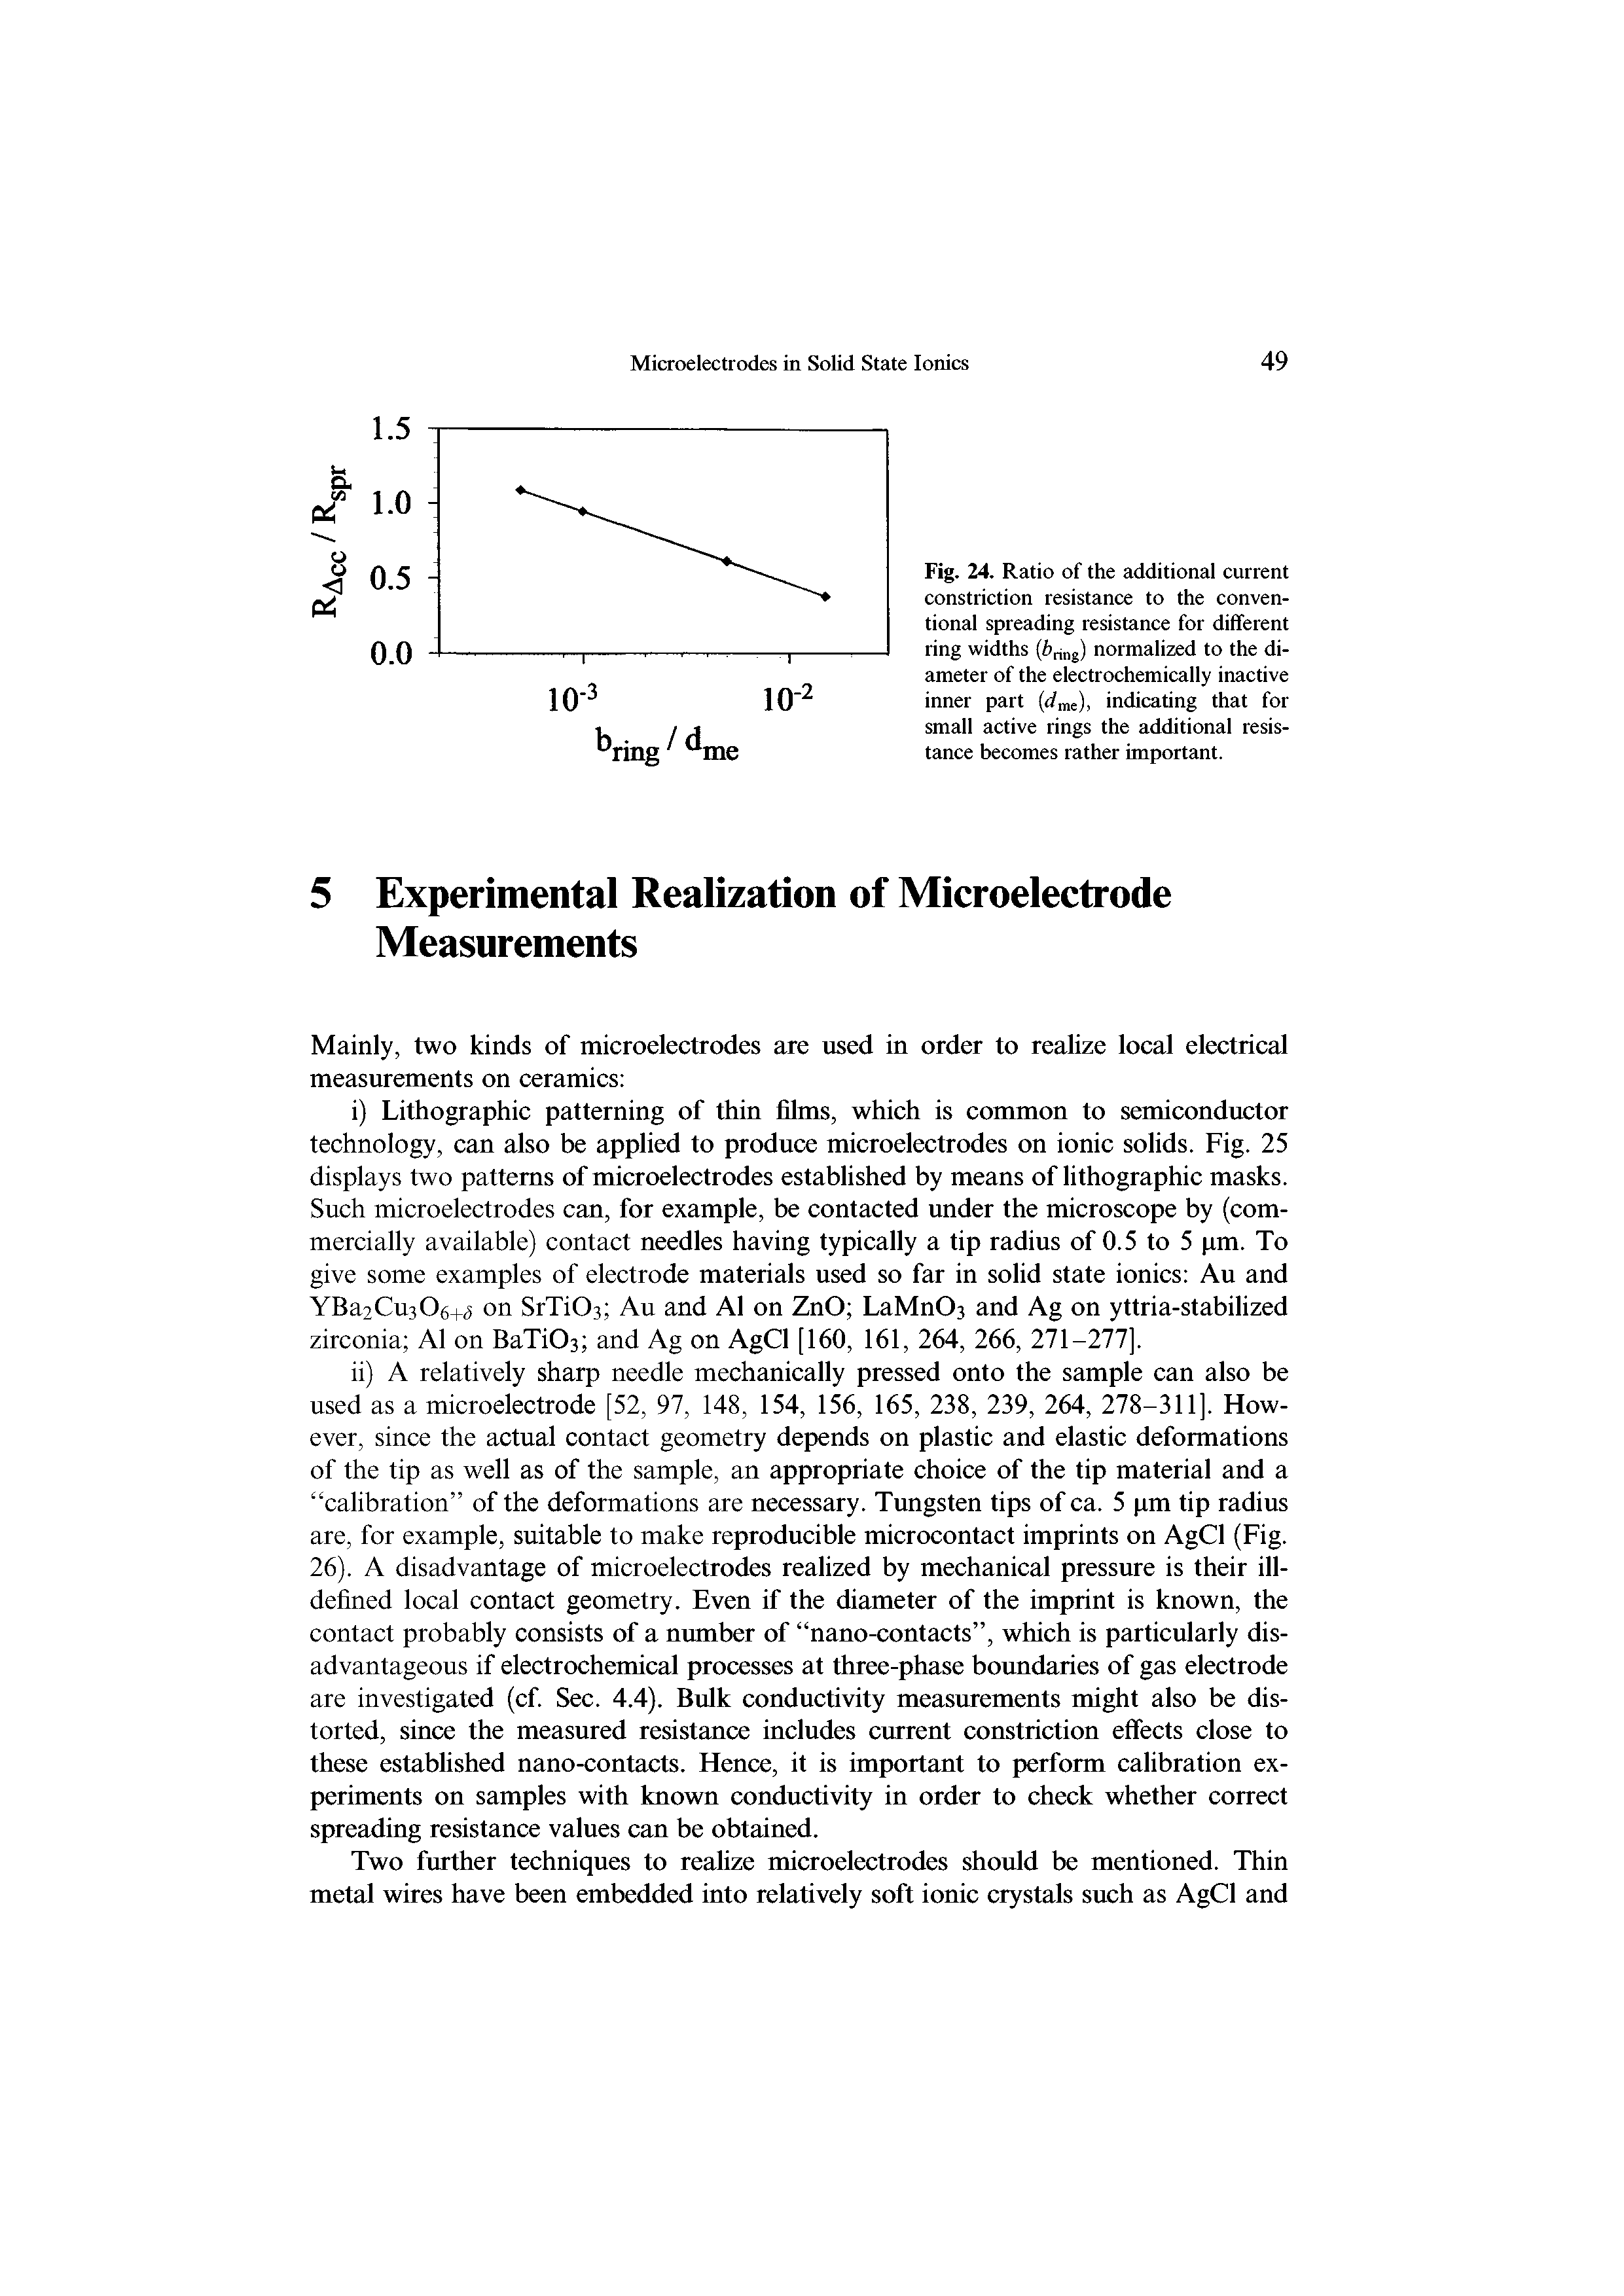 Fig. 24. Ratio of the additional current constriction resistance to the conventional spreading resistance for different ring widths (7>nng) normalized to the diameter of the electrochemically inactive inner part (dme), indicating that for small active rings the additional resistance becomes rather important.